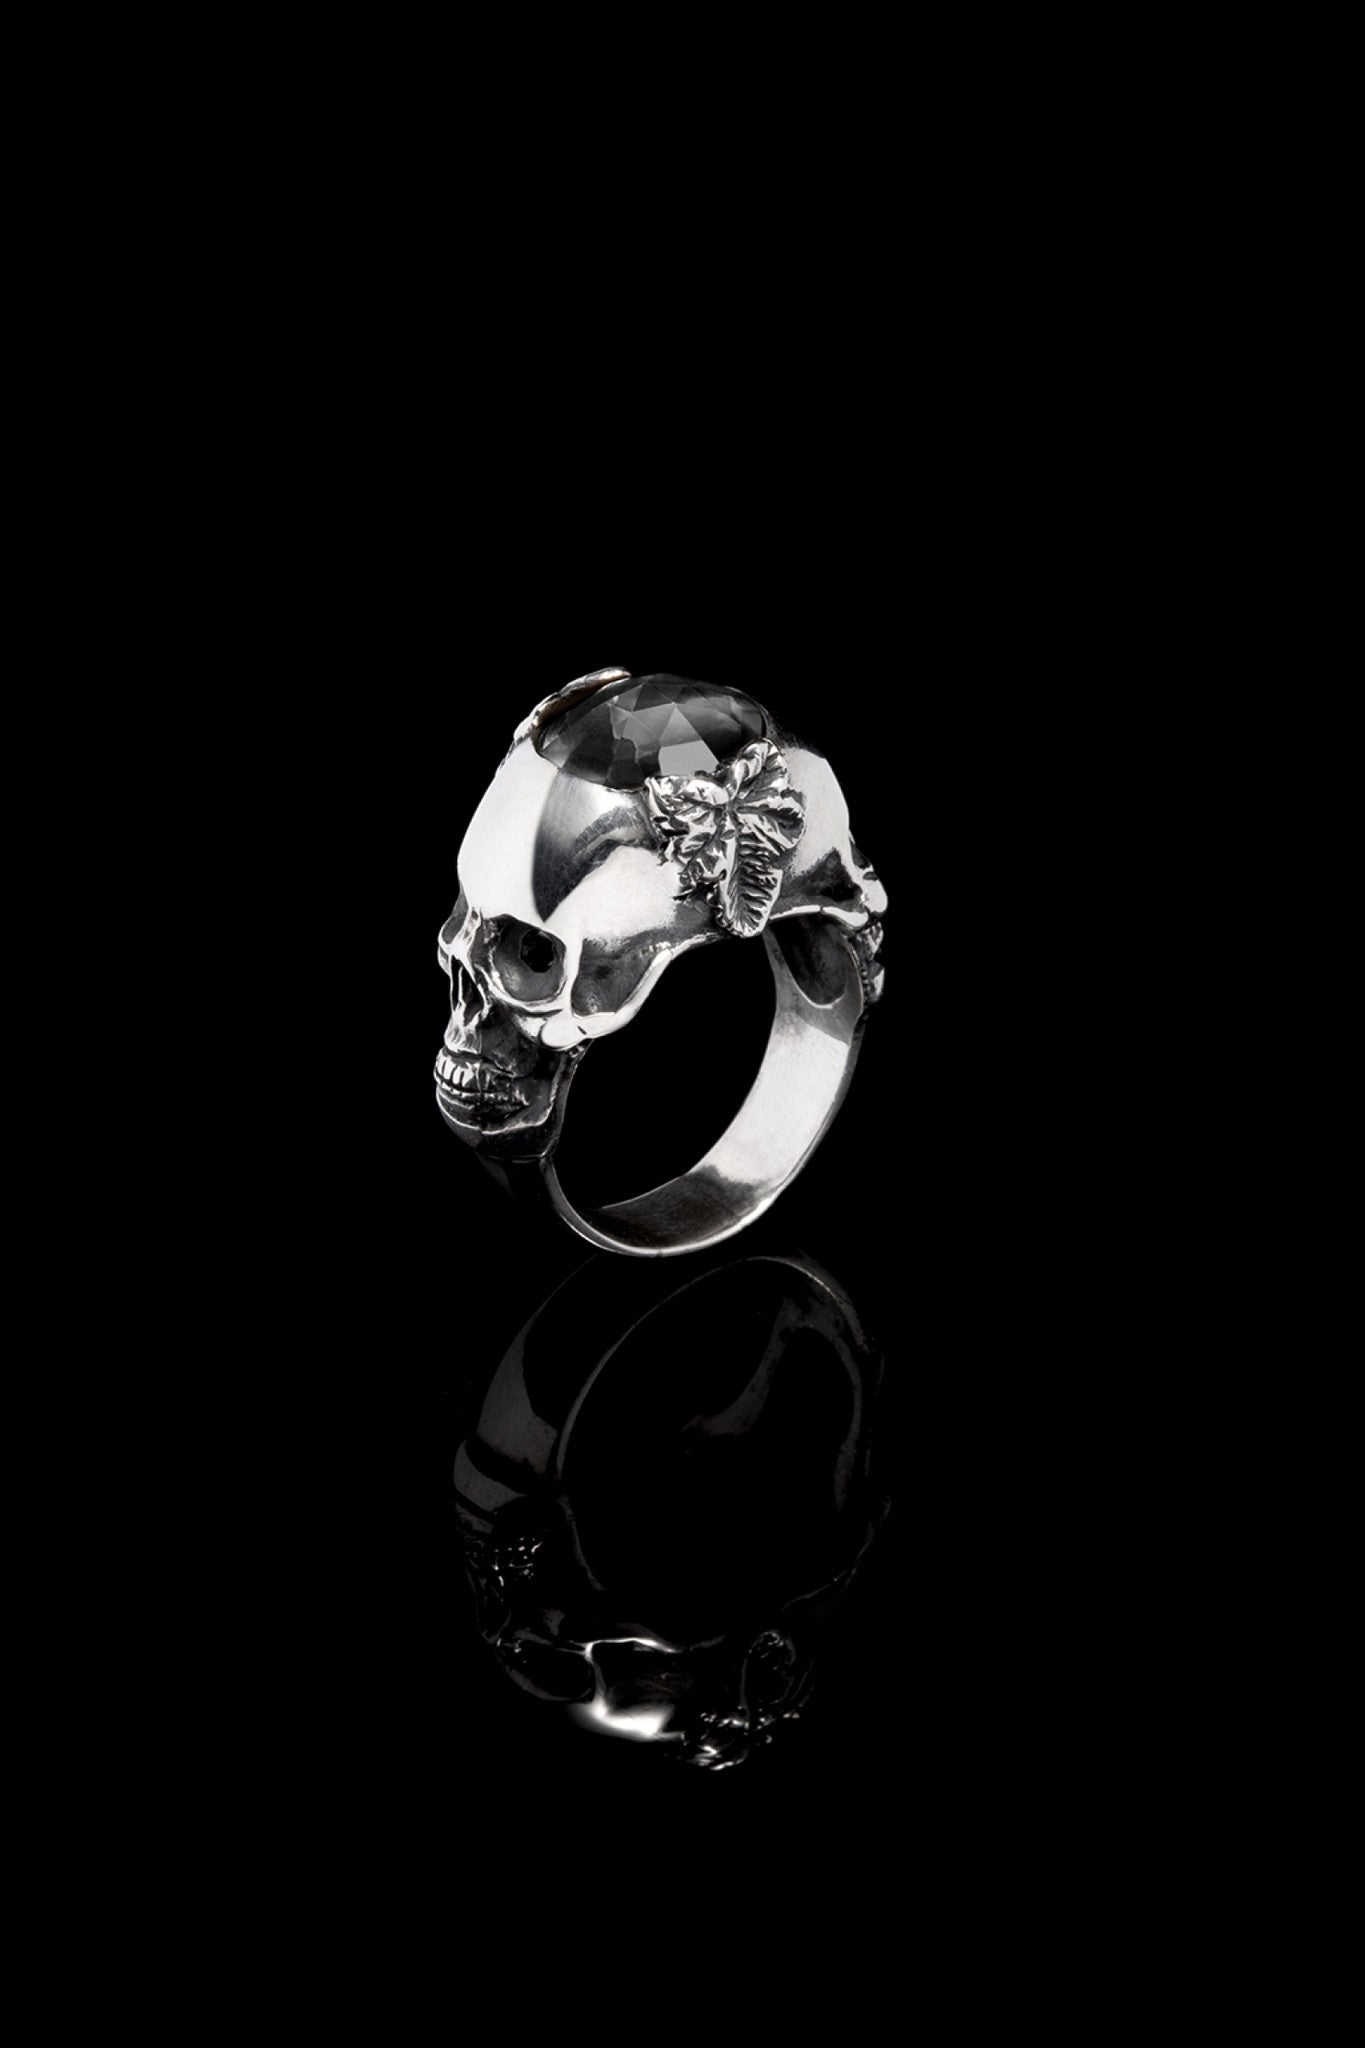 Ugo Cacciatori, Silver, Jewelry, Sterling Silver, Ring, Onyx, Onyx and Black Diamonds, Onyx and Brown Diamonds, Onyx and Emeralds, Onyx and Rubies, Onyx and Sapphires